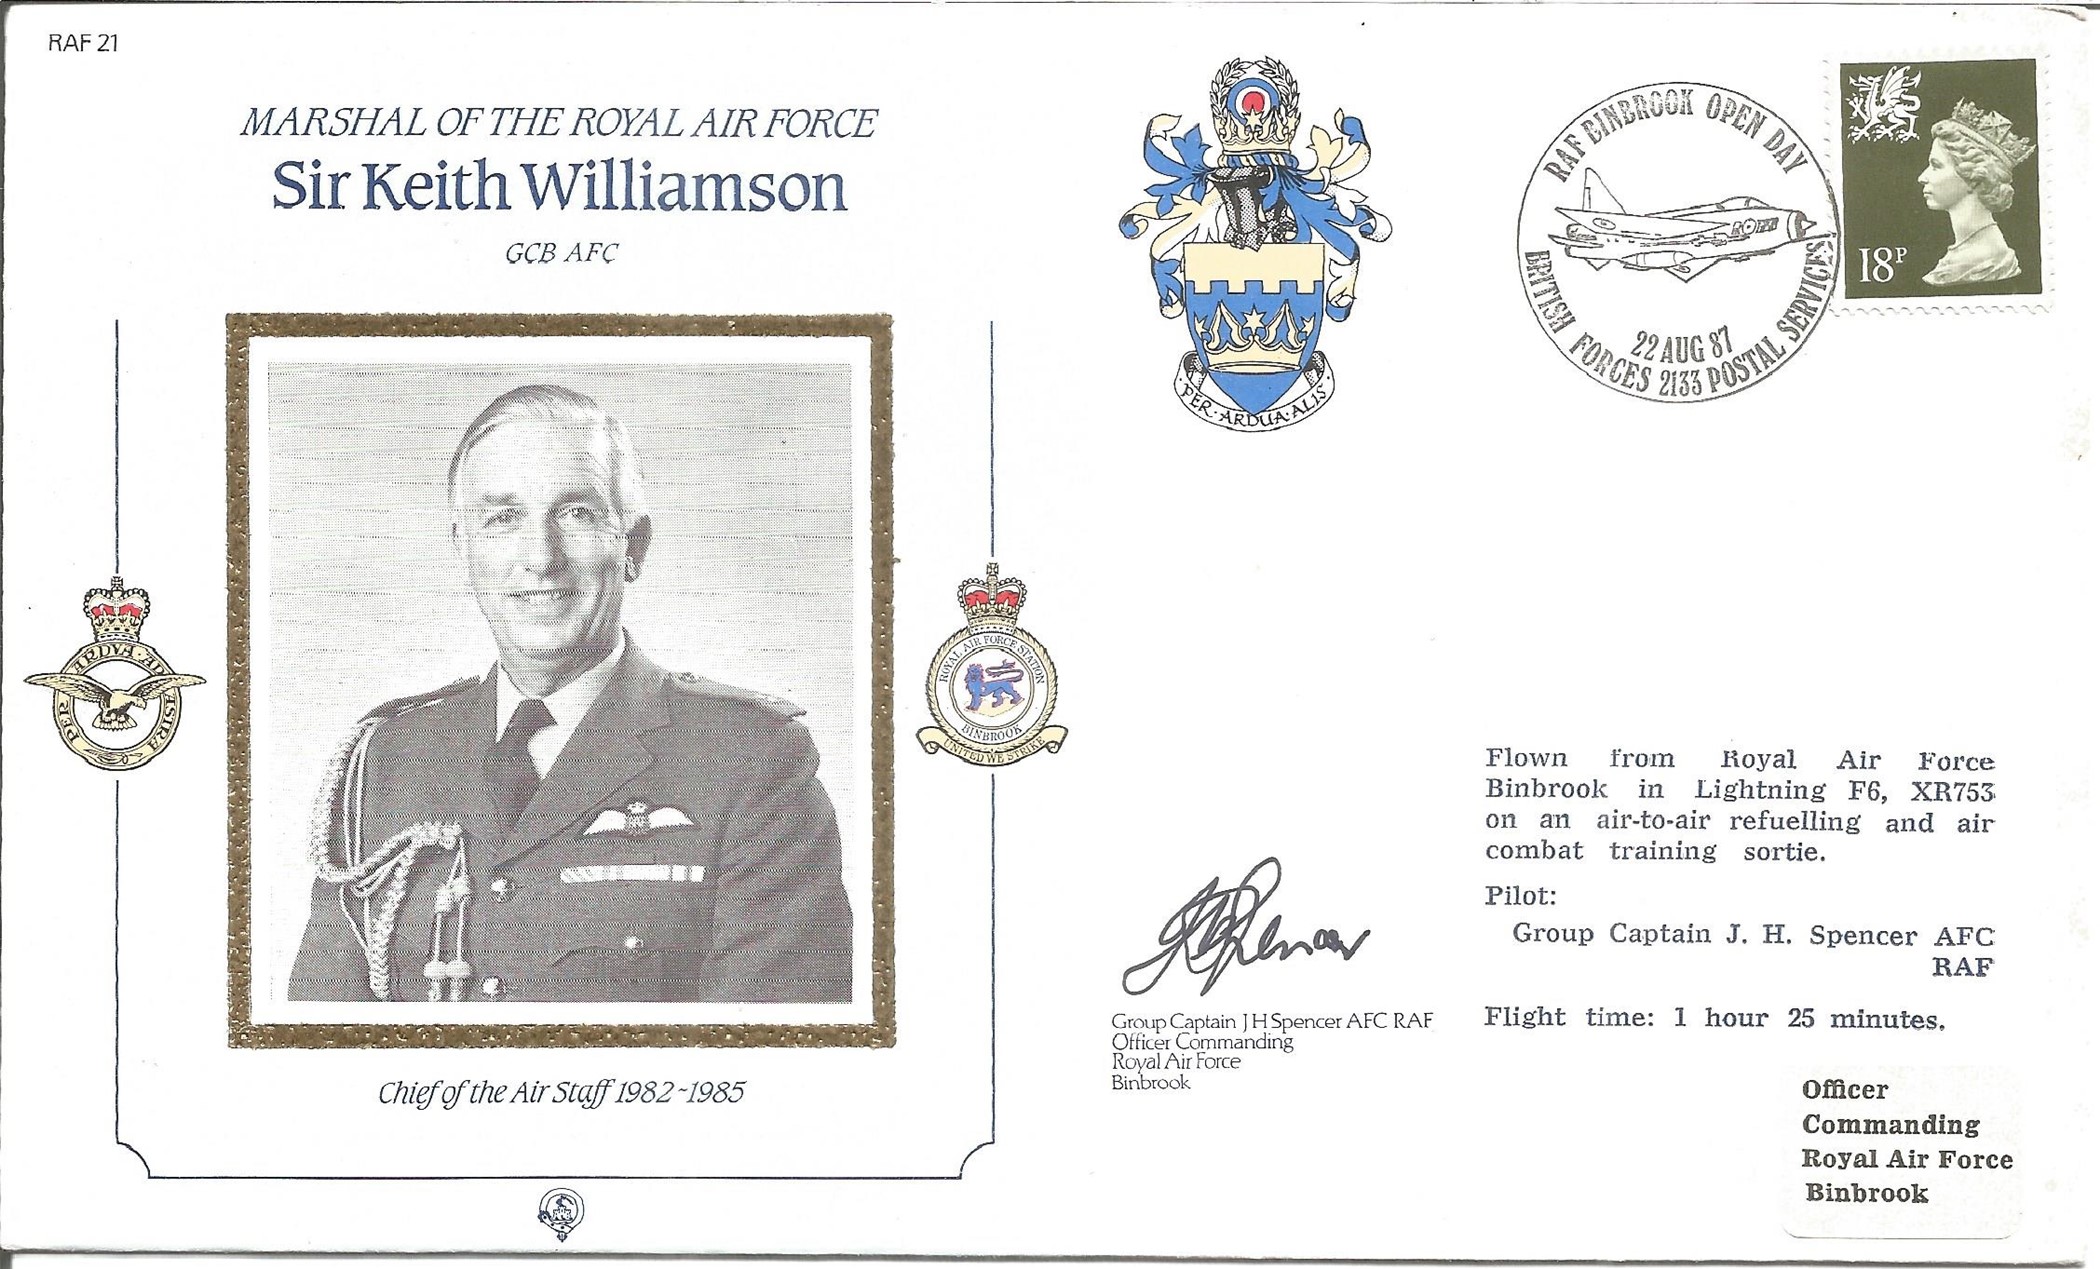 Sir Keith Williamson GCB AFC Chief of Air Staff 1982 85 signed FDC No. 758 of 2600. Flown from RAF